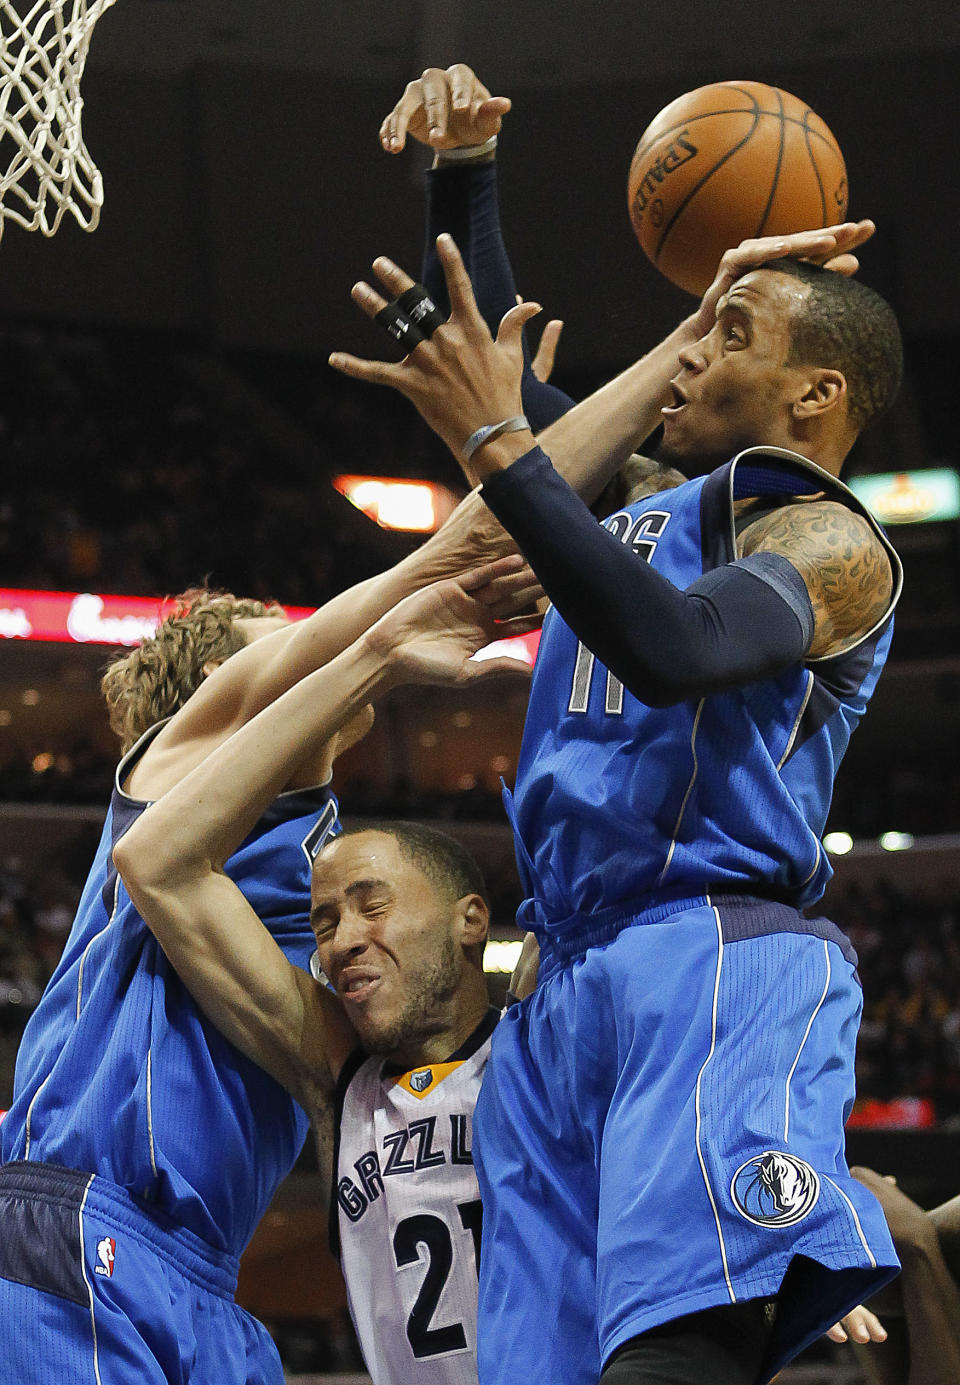 Memphis Grizzlies forward Tayshaun Prince (21) gets tangled with Dallas Mavericks guard Monta Ellis (11) and forward Dirk Nowitzki, of Germany, in the second half of an NBA basketball game Wednesday, April 16, 2014, in Memphis, Tenn. The Grizzlies won in overtime 106-105. (AP Photo/Lance Murphey)